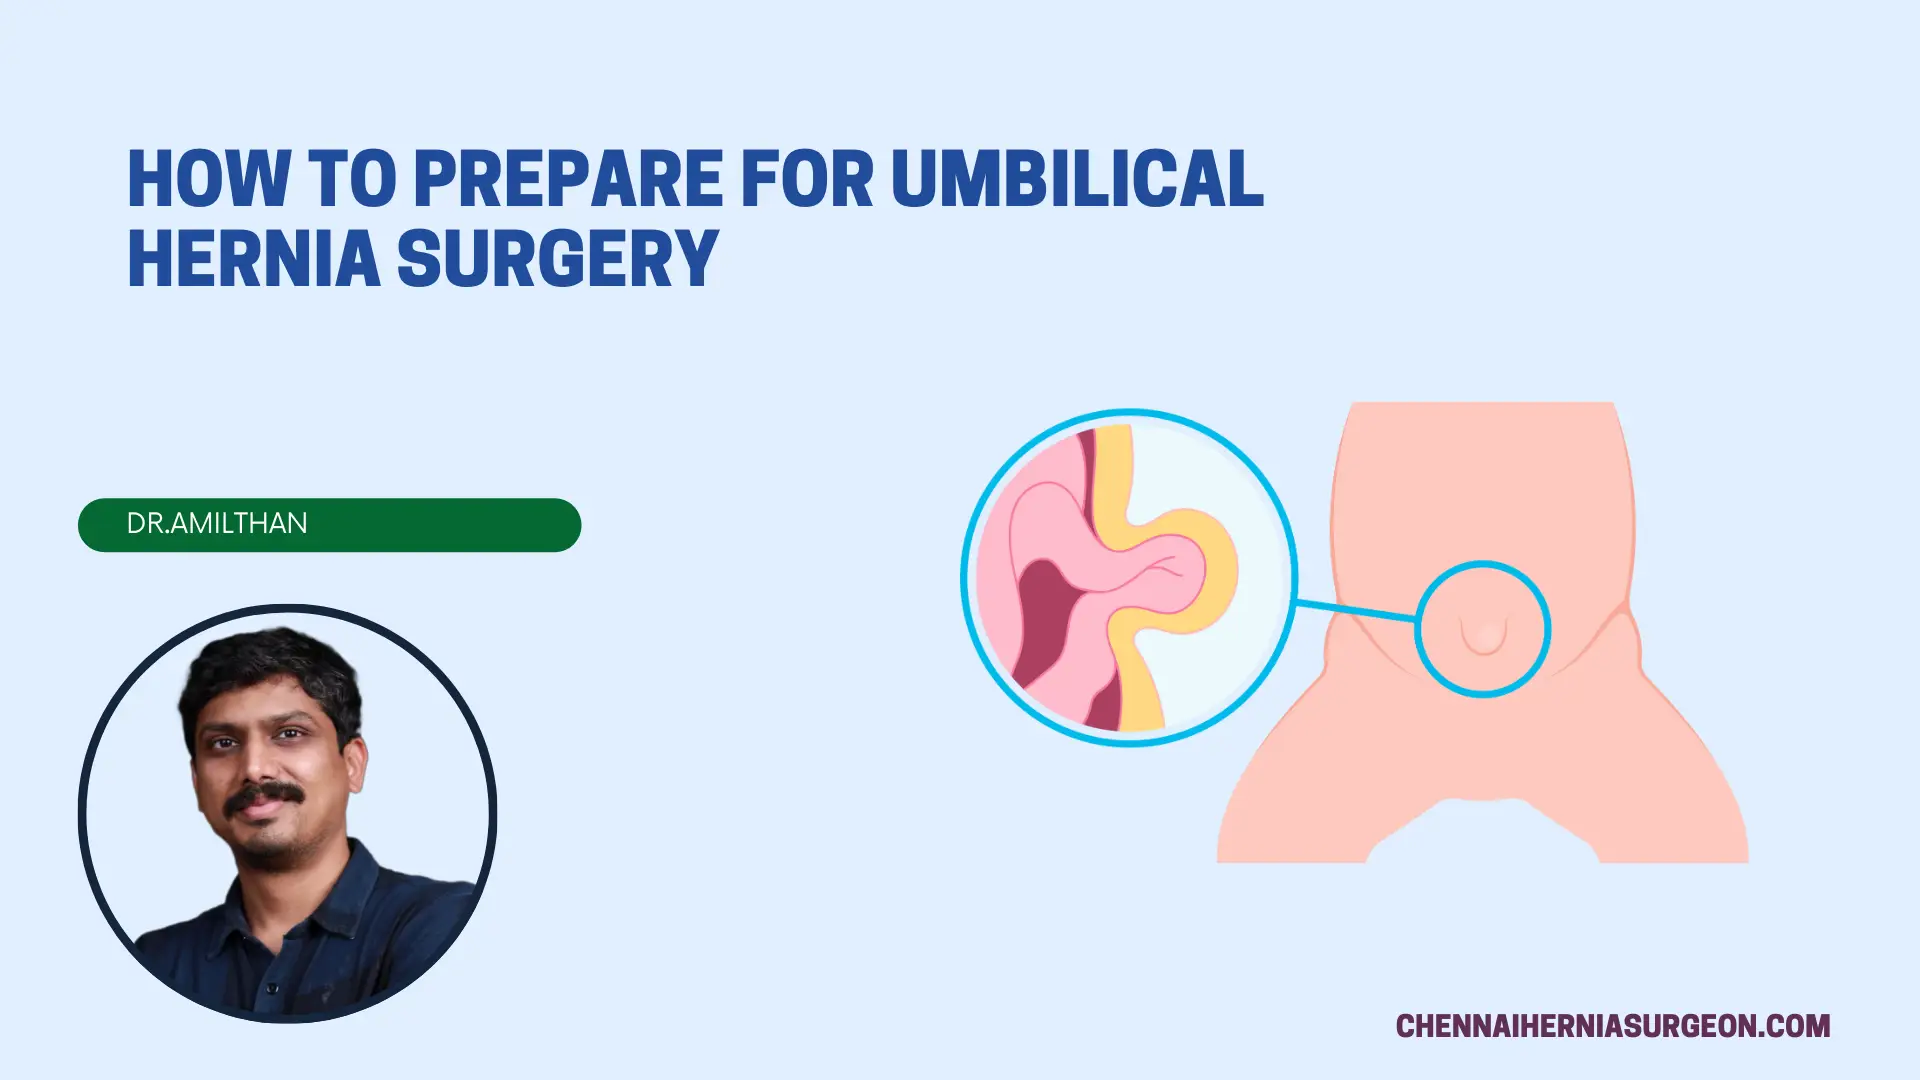 HOW TO PREPARE FOR UMBILICAL HERNIA SURGERY